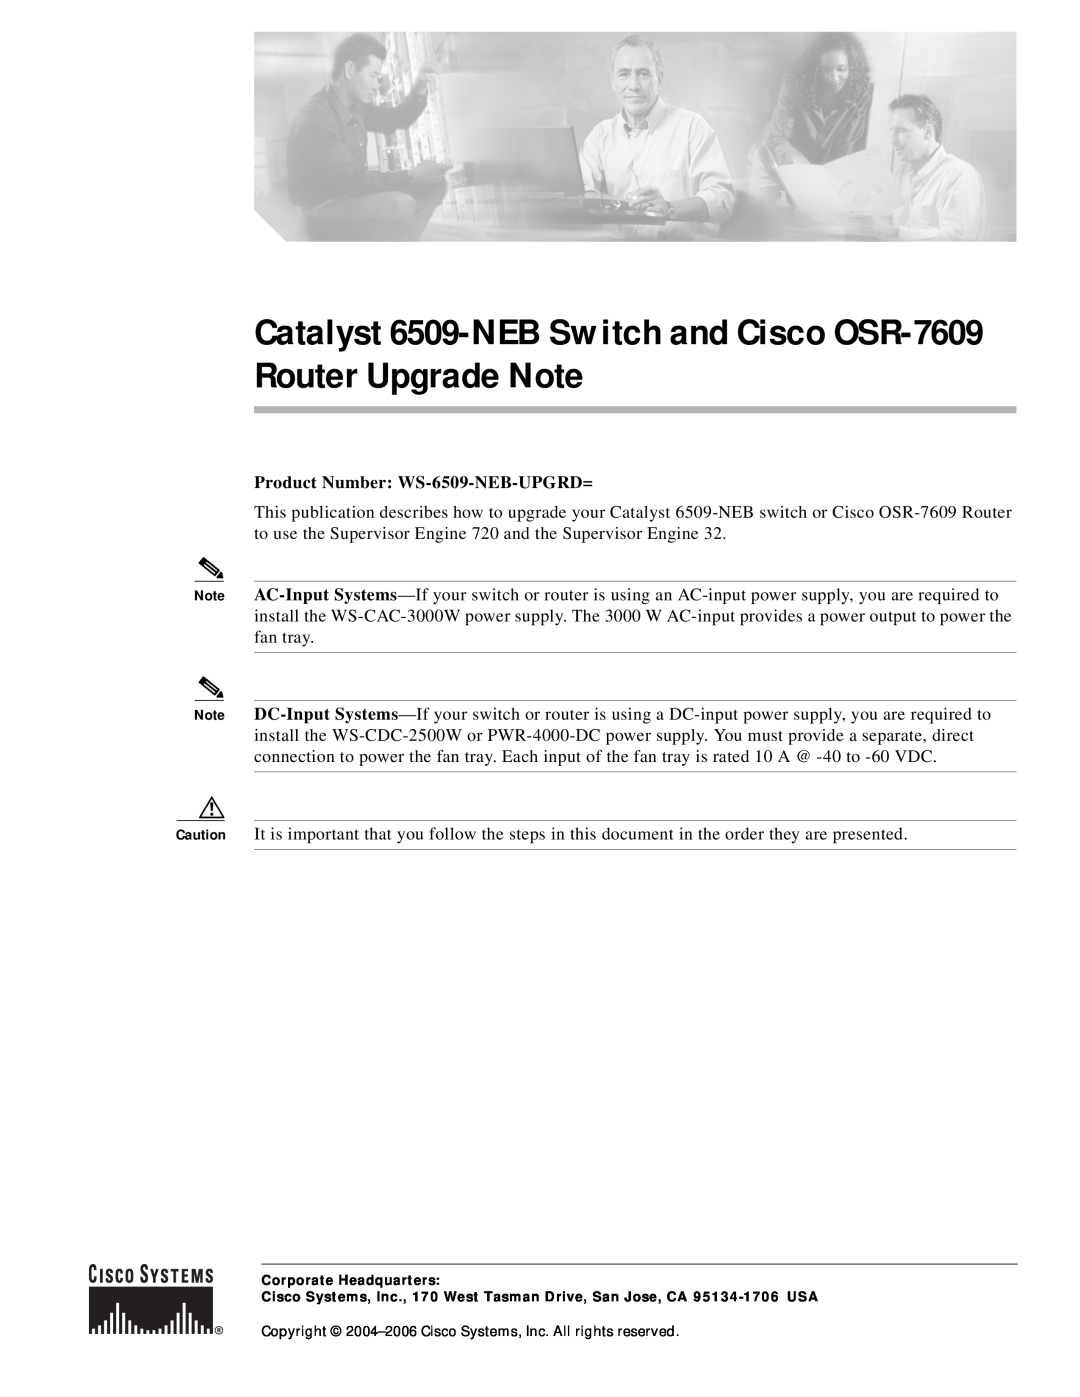 Cisco Systems OSR-7609 manual Product Number WS-6509-NEB-UPGRD= 